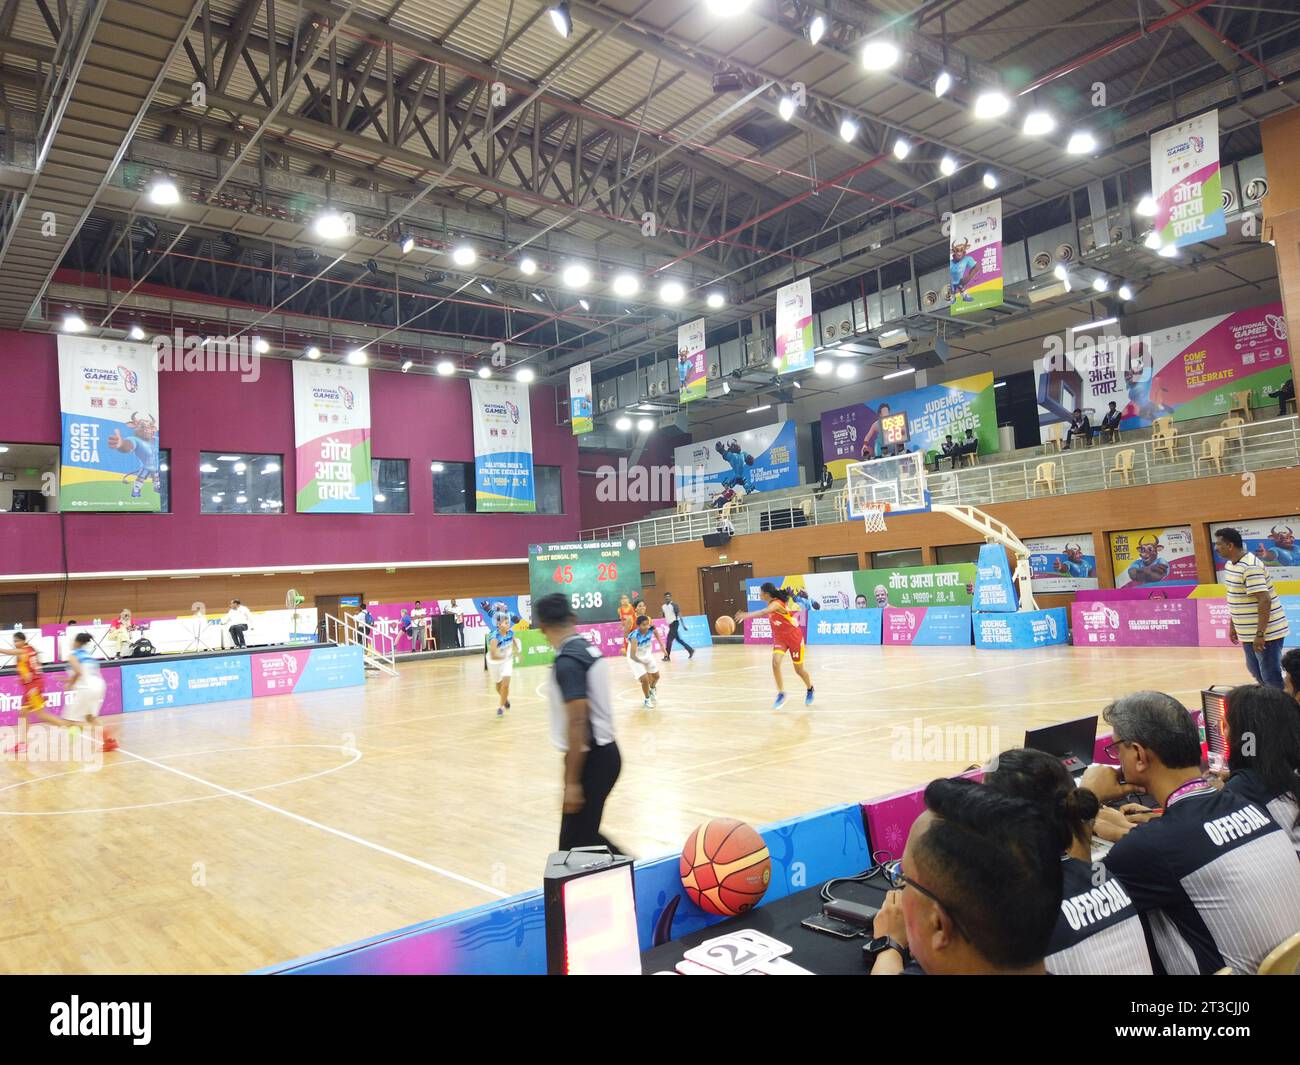 Action from the basketball match between hosts Goa and West Bengal of the National Games taking place at Manohar Parrikar Indoor stadium in Navelim village in the Indian state of Goa. The formal inauguration will take place on October 26 with Prime Minister Narendra Modi formally opening the championship at a function at Fatorda stadium. Stock Photo